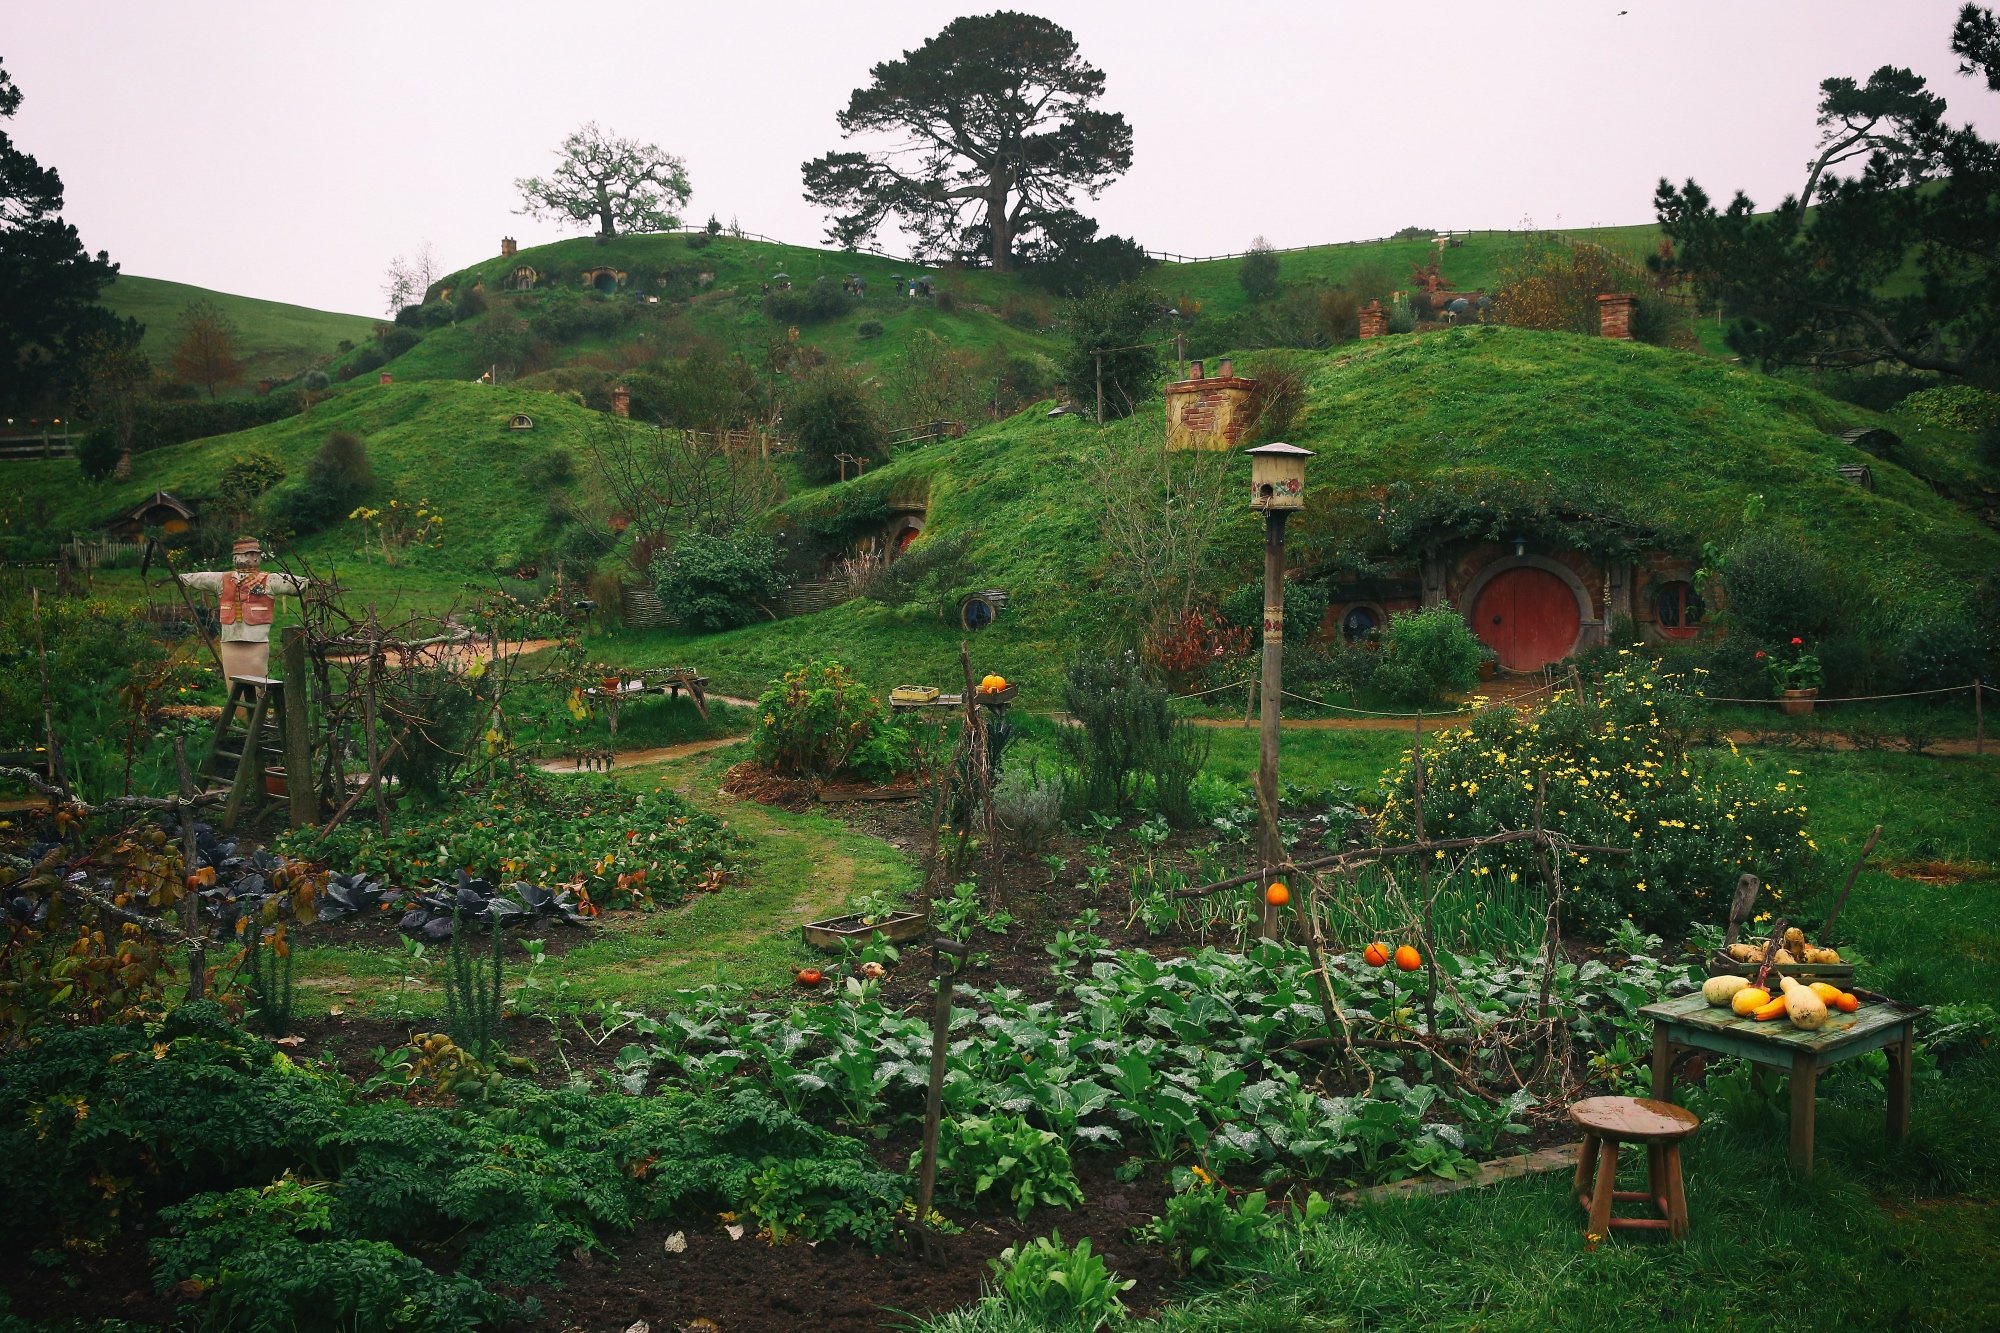 'Lord of the Rings' hobbit home in the Shire filming location. 'Lord of the Rings' actors Elijah Wood, Sean Astin, and Billy Boyd recently helped spread the news about an Italian pastry chef, Nicolas Gentile's, efforts to raise money to build his own Shire in Italy. He already lives in a Hobbit hole he made all on his own.